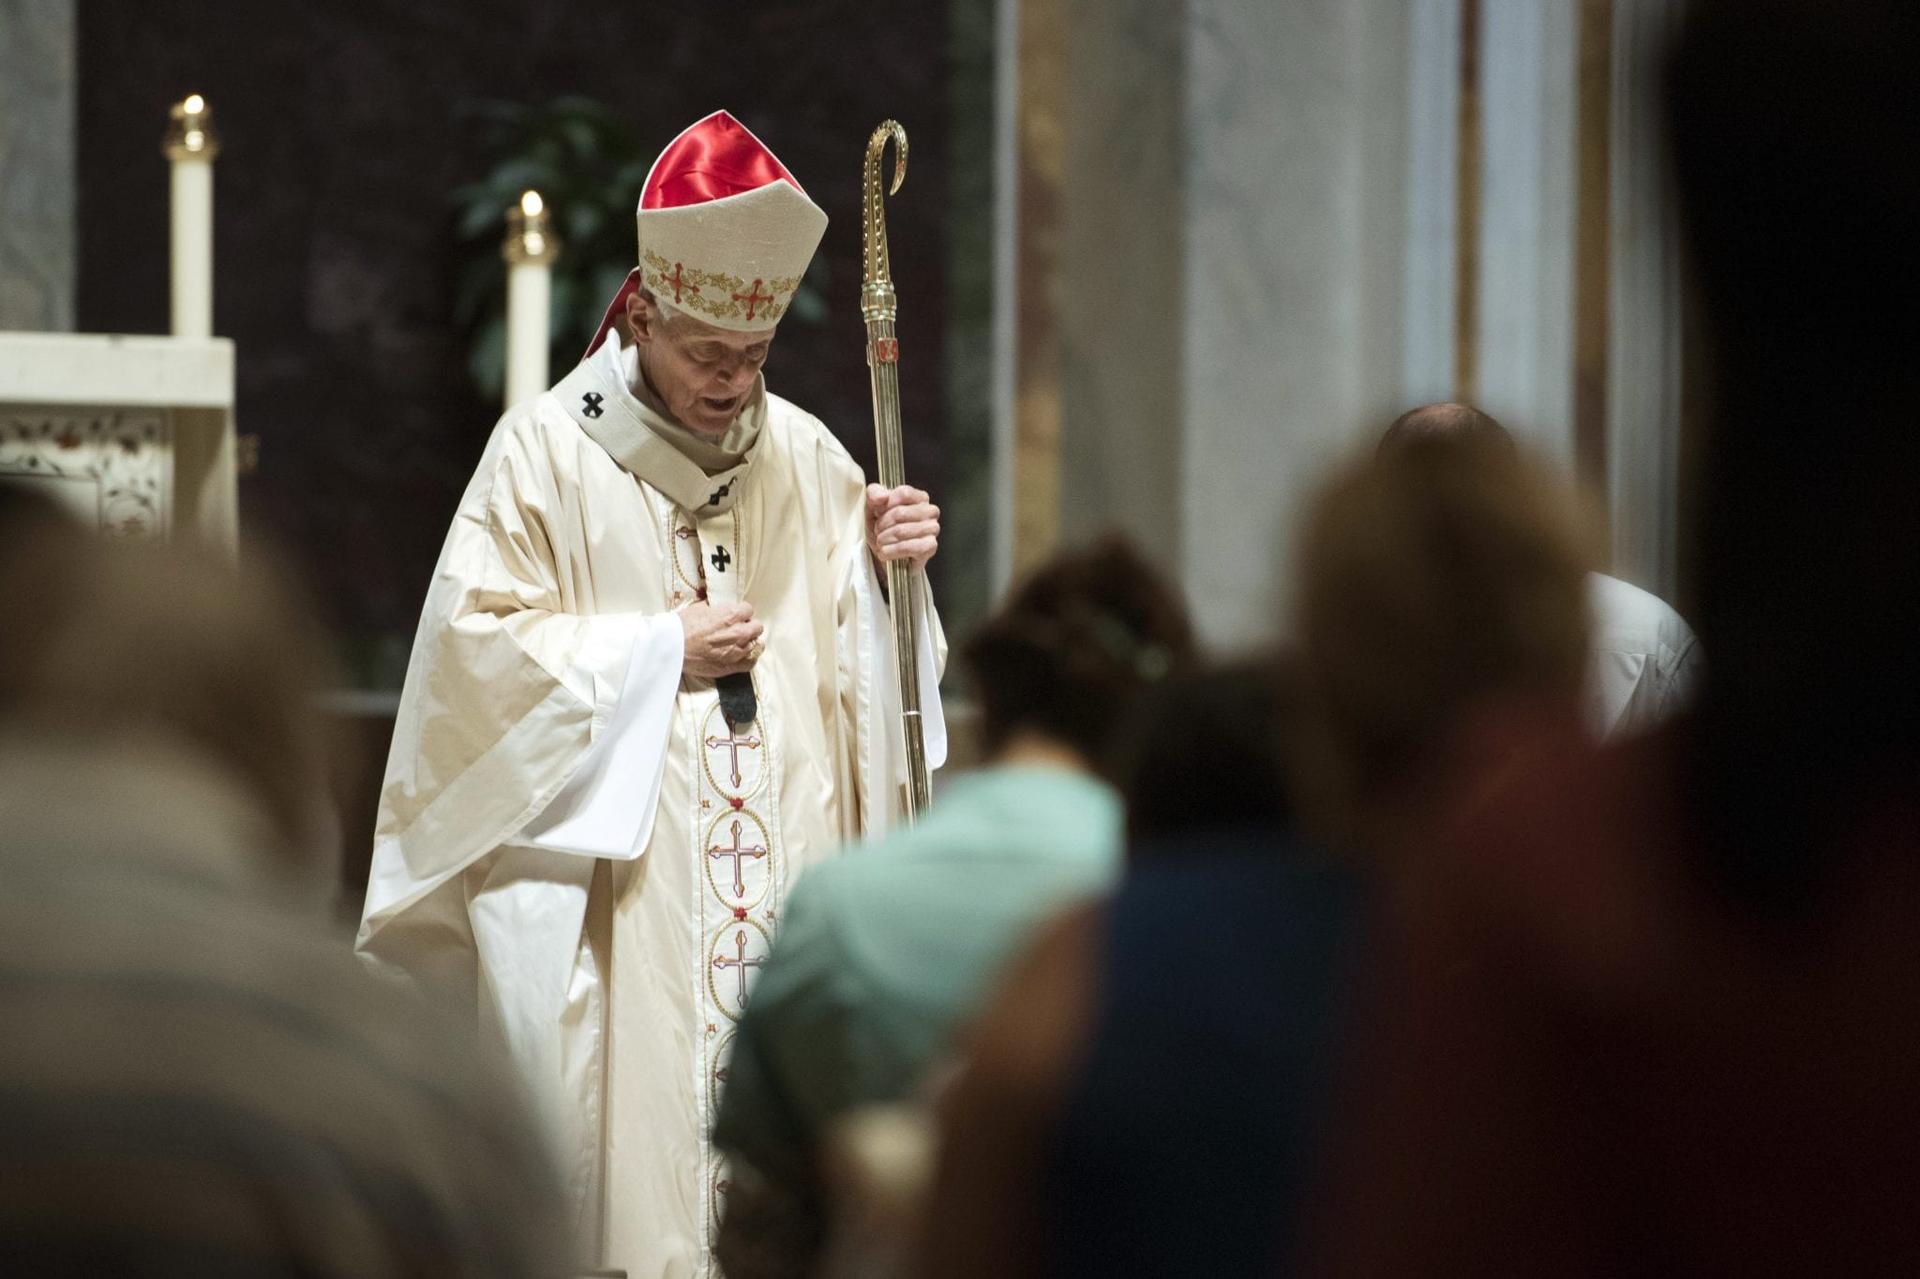 Naming names: A reckoning is underway in US Catholic Church